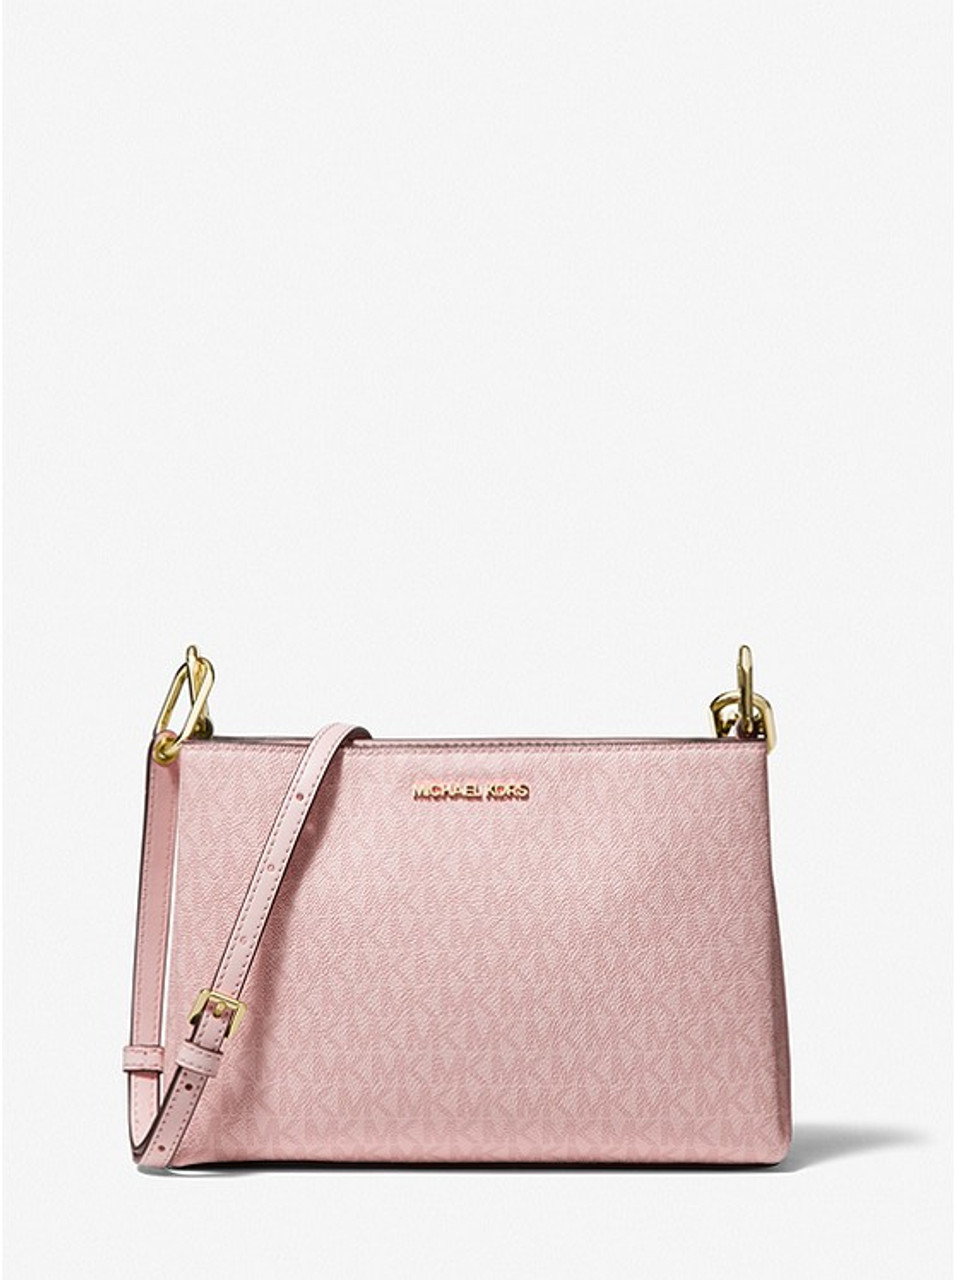 Michael Kors Bets Heavy on New Logo Hardware for Its Collection Spring 2020  Bags - PurseBlog | Bags, Fashion bags, Michael kors collection